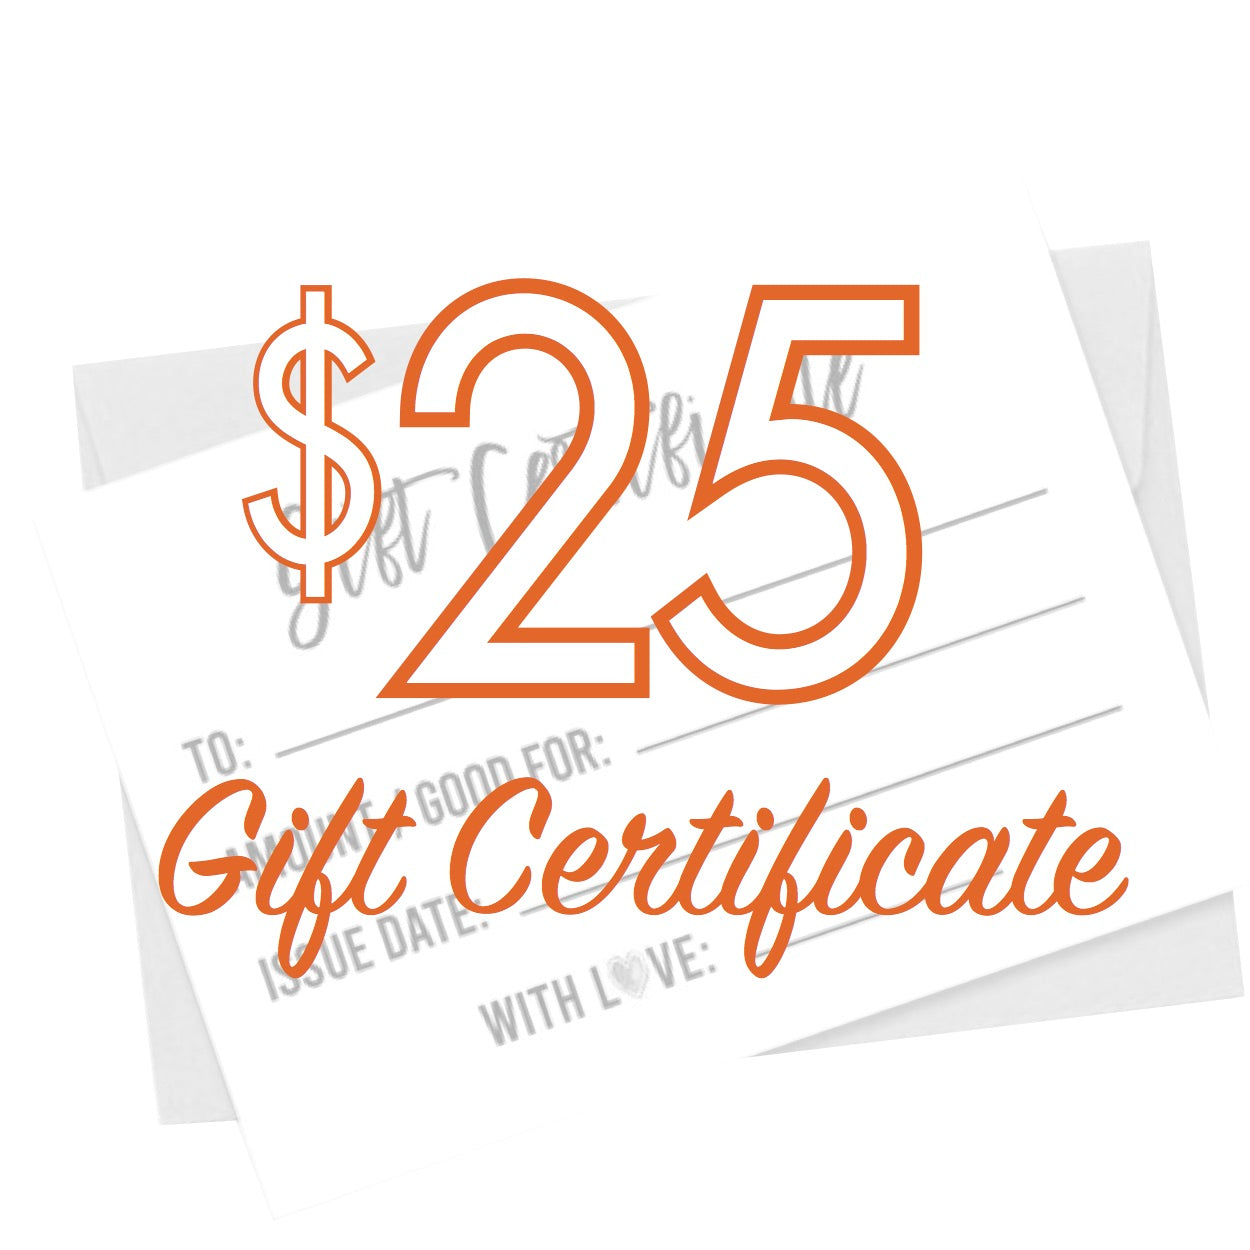 To Spend Online $25 Gift Certificate